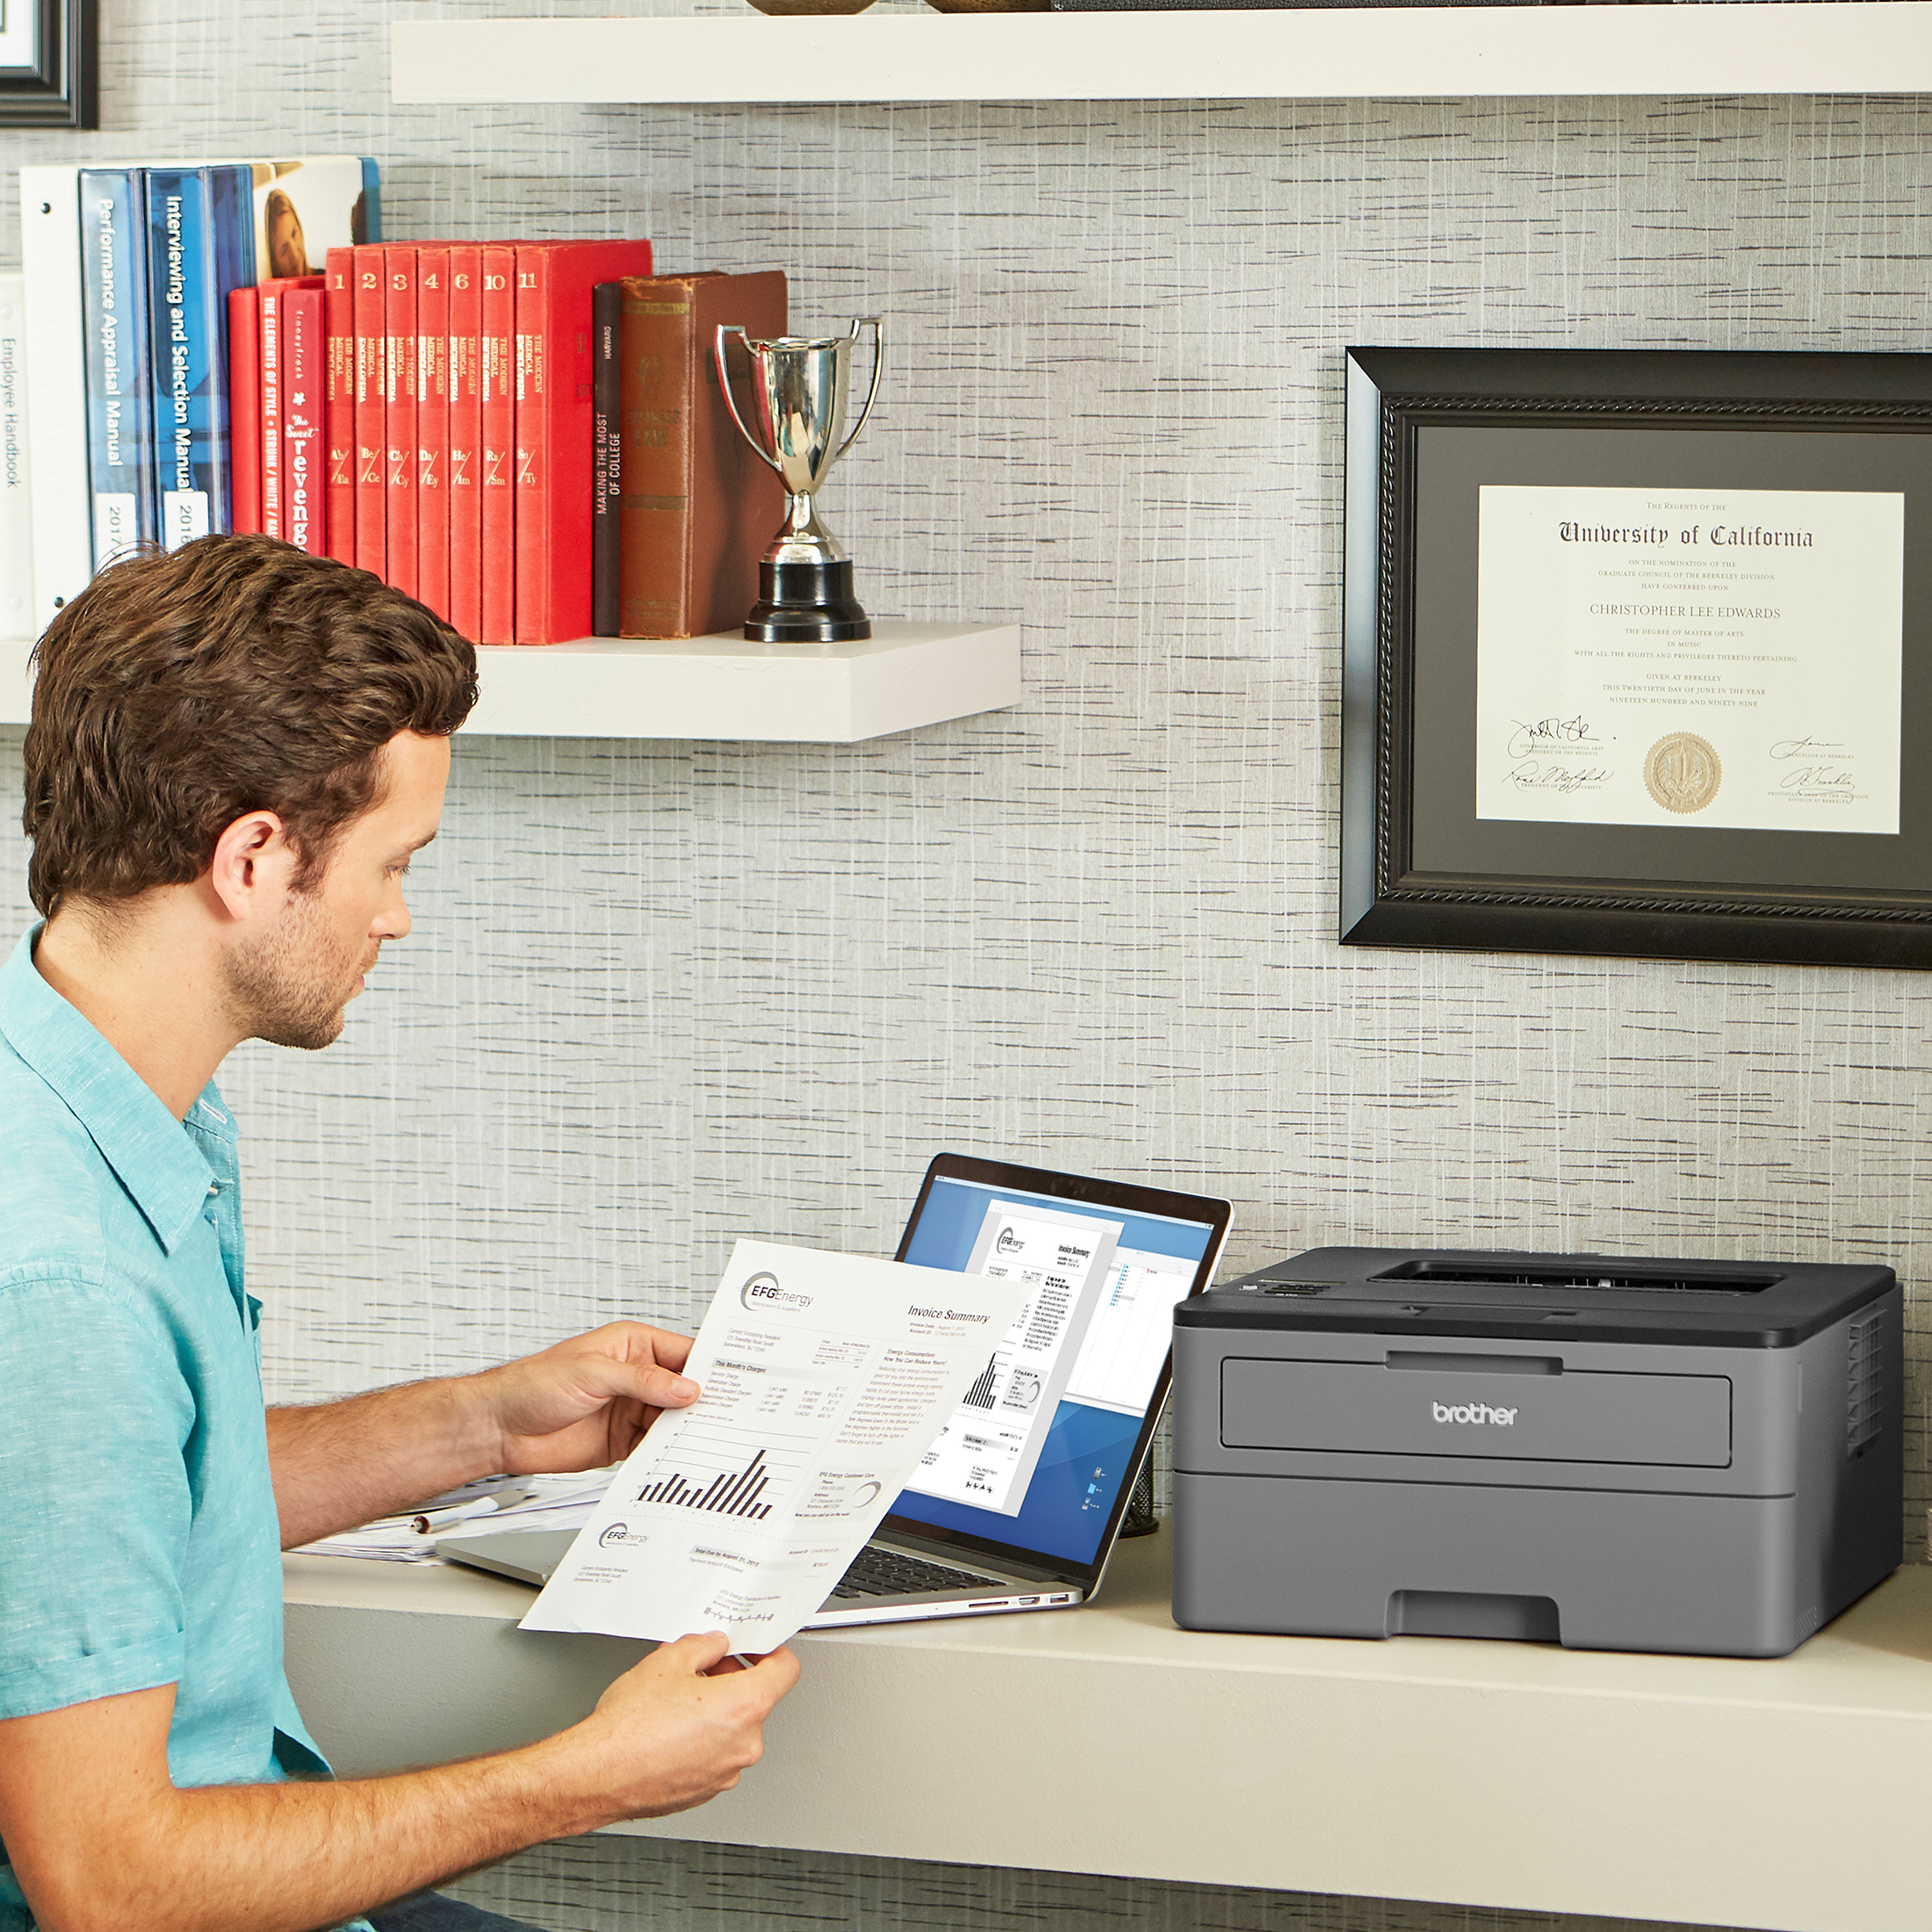 Brother HL-L2305W Compact Mono Laser Single Function Printer with Wireless and Mobile Device Printing¹, Restored - image 6 of 6